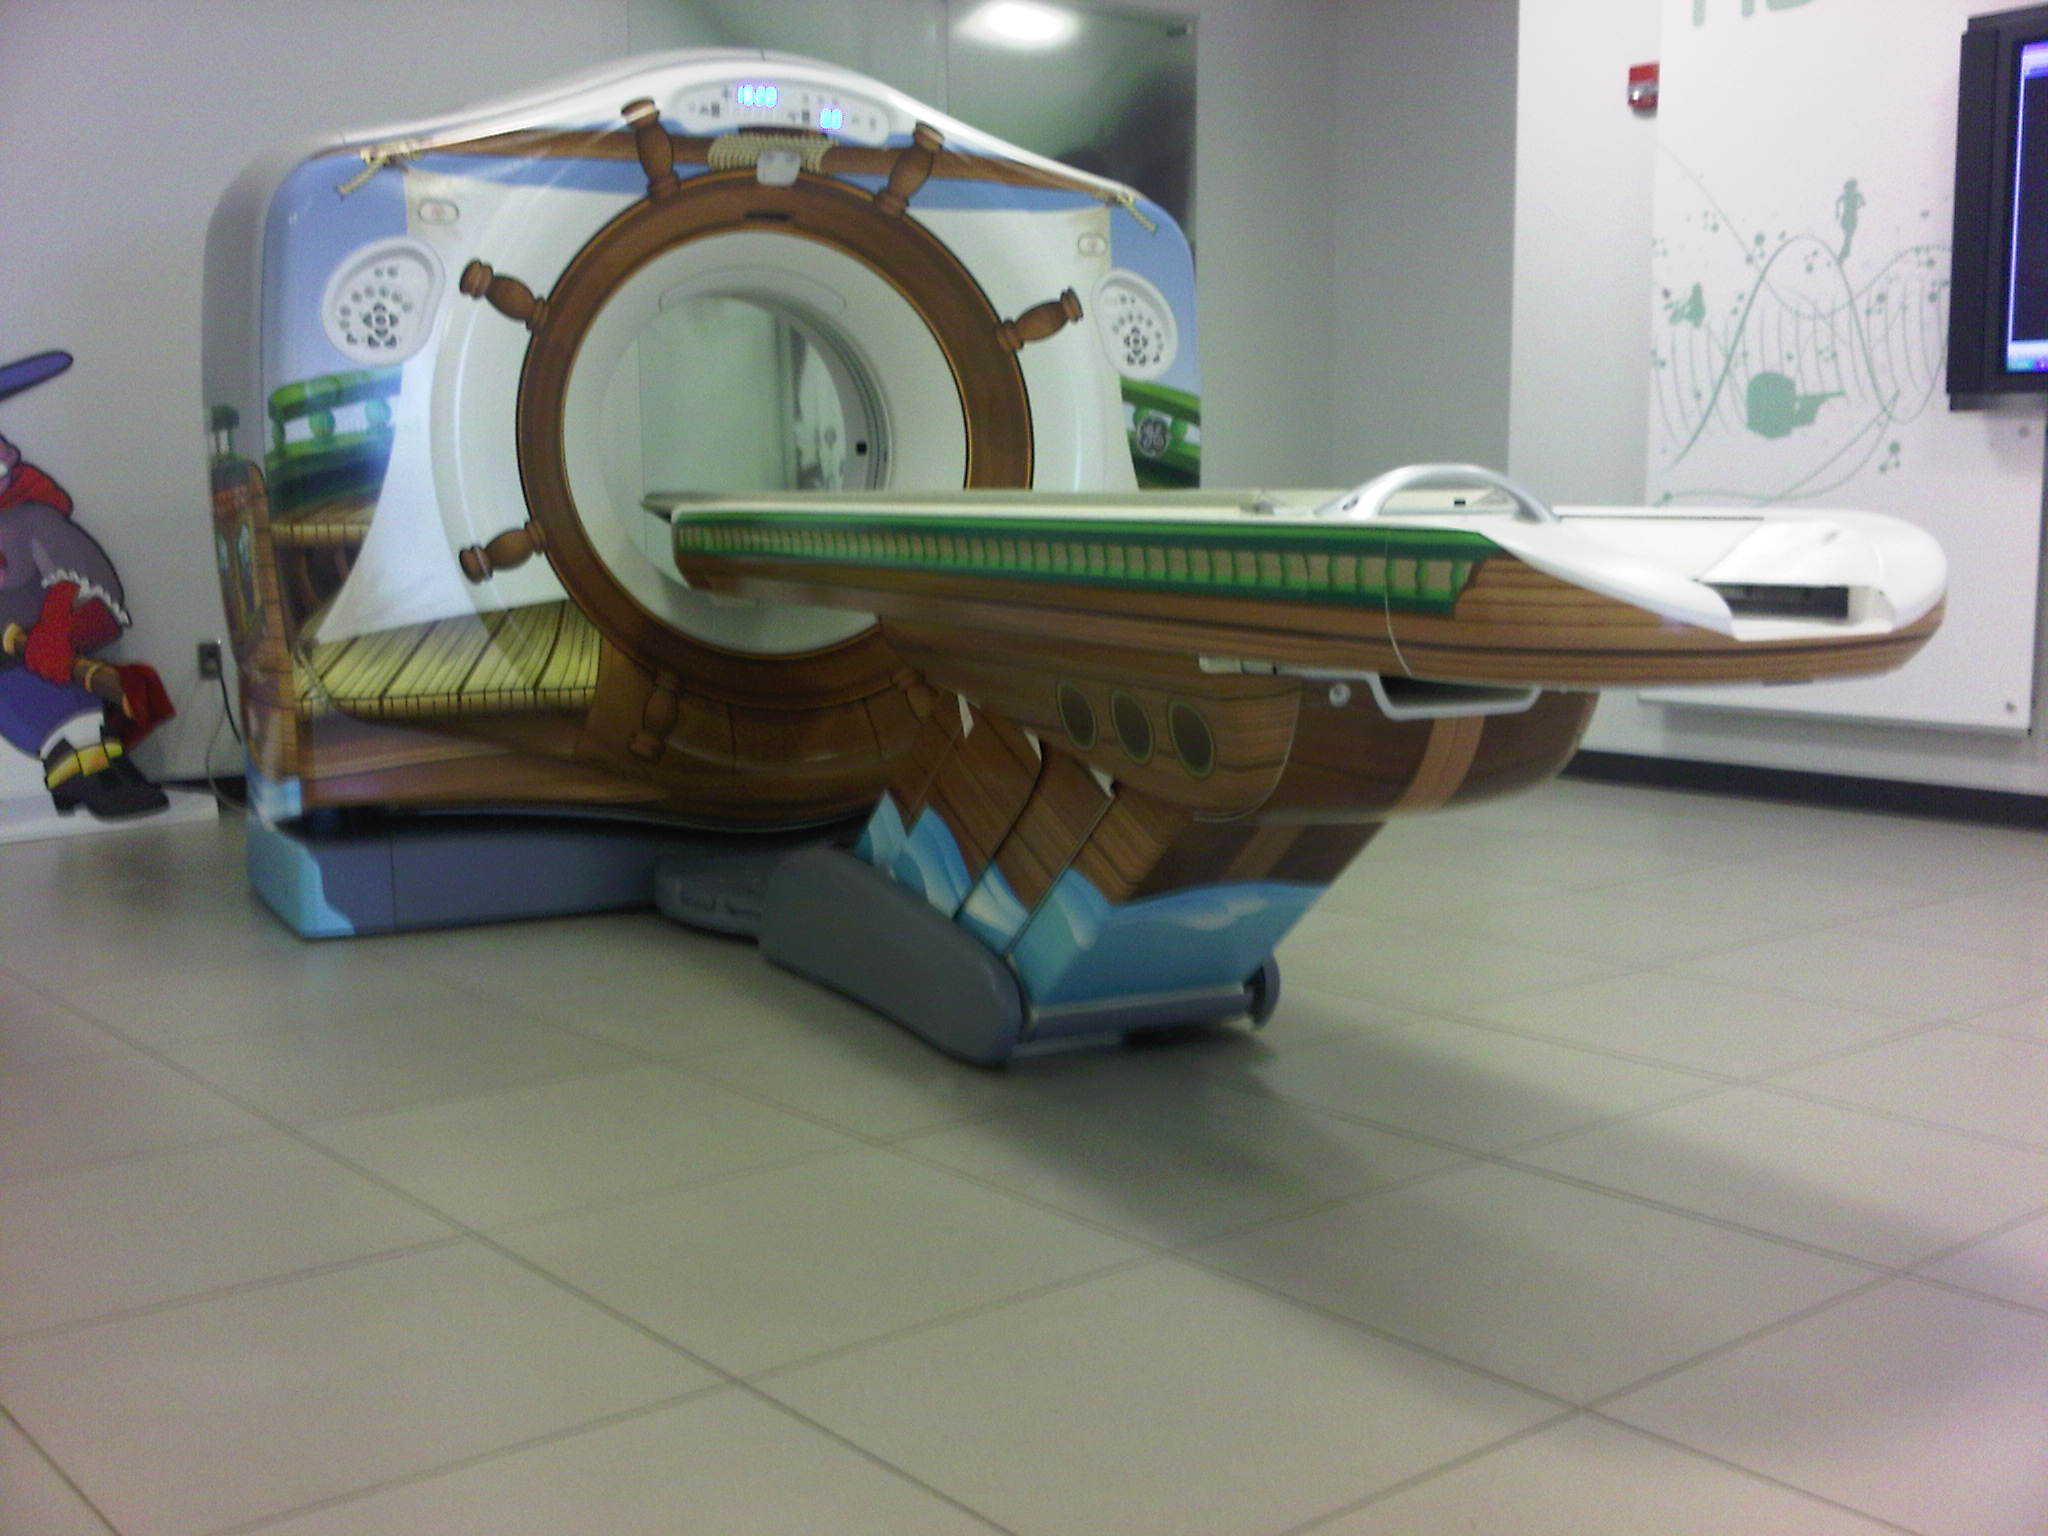 This is picture of a CT system (this one has decals on it for use in a children's hospital).  It is also representative of a MR table.  The table on this particular model is 7+ ft long, about 24 inches wide, and has a minimum height of about 18 inches.  Note the emergency extraction handle at the foot end of the table.  Also note that there is not structural material under the table side covers where transfer supports could sufficiently be anchored.